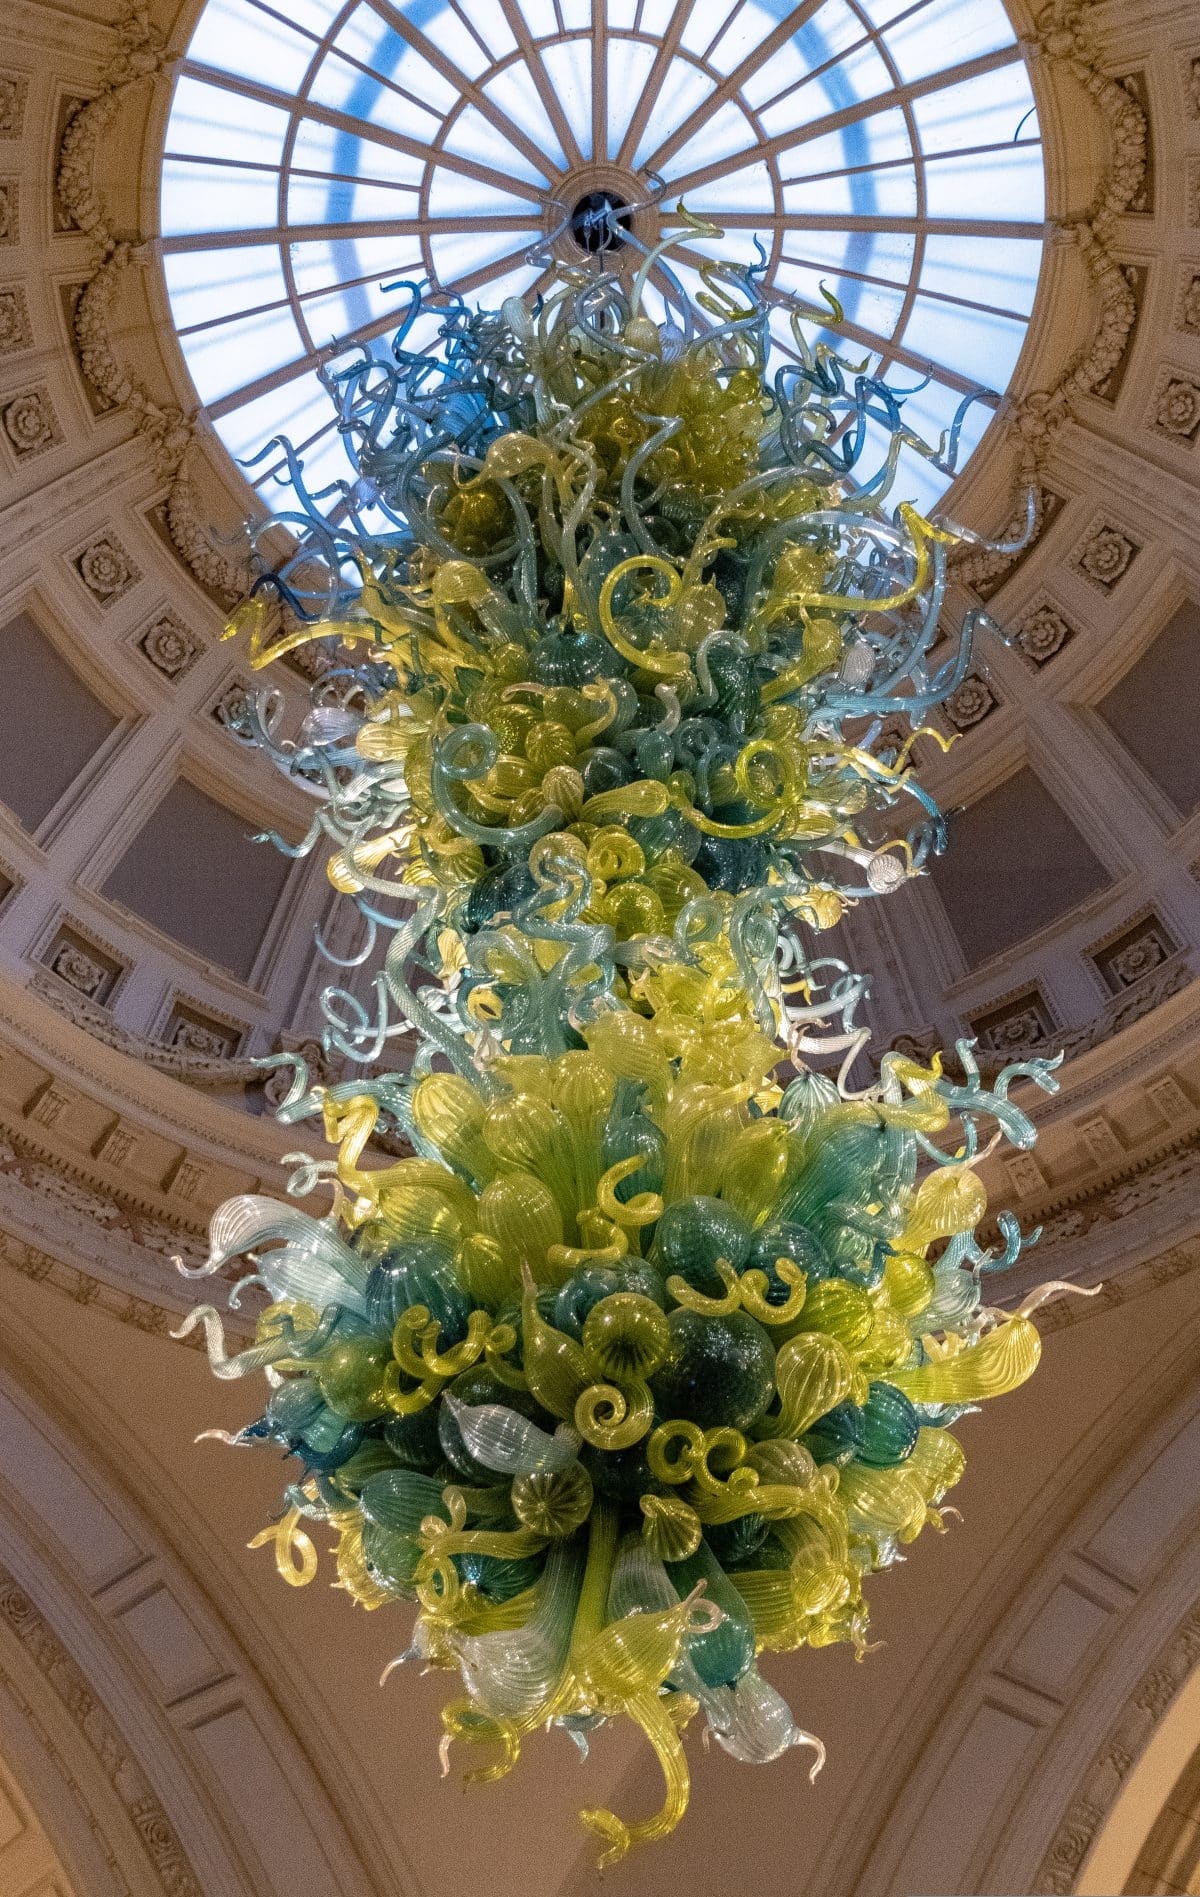 PhotoPOSTcard: Chihuly at the V&A